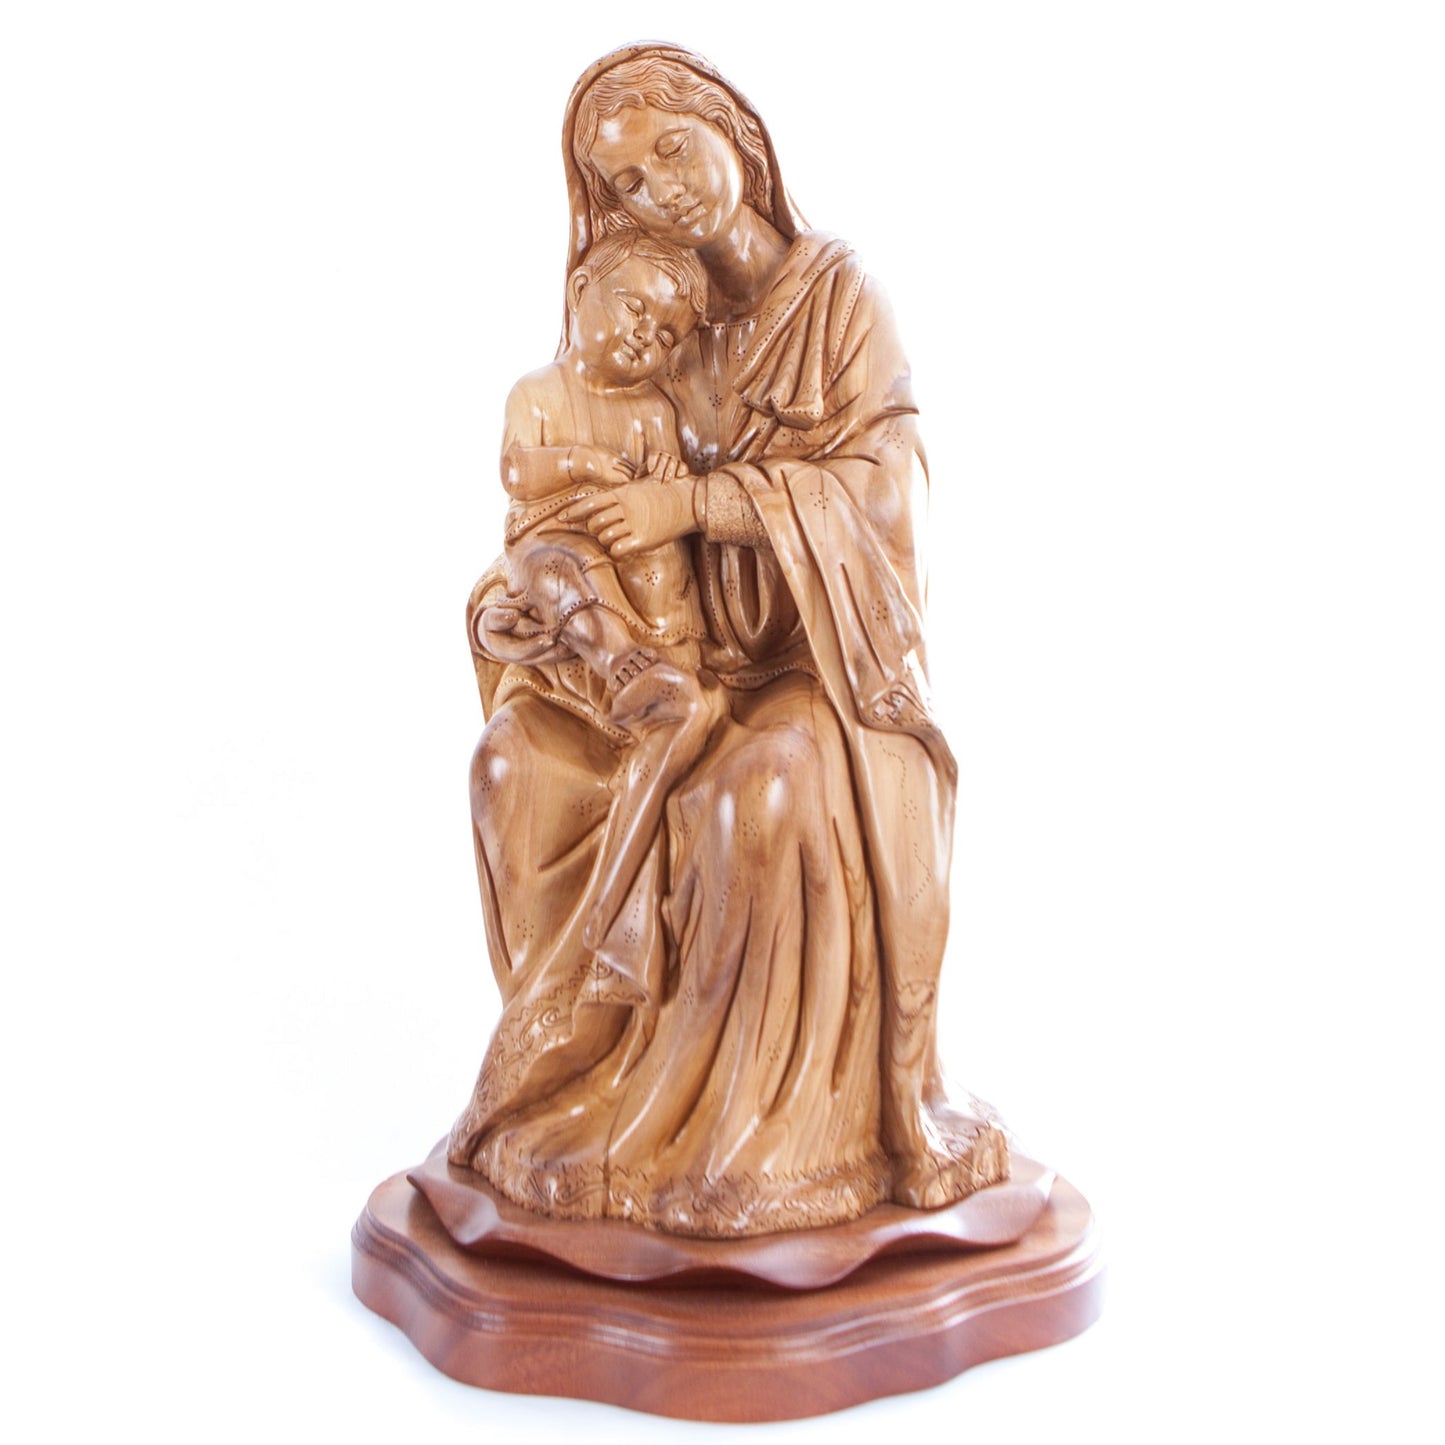 Virgin Mary Holding Sleeping Baby Jesus, 13.8" Wooden Masterpiece Carving